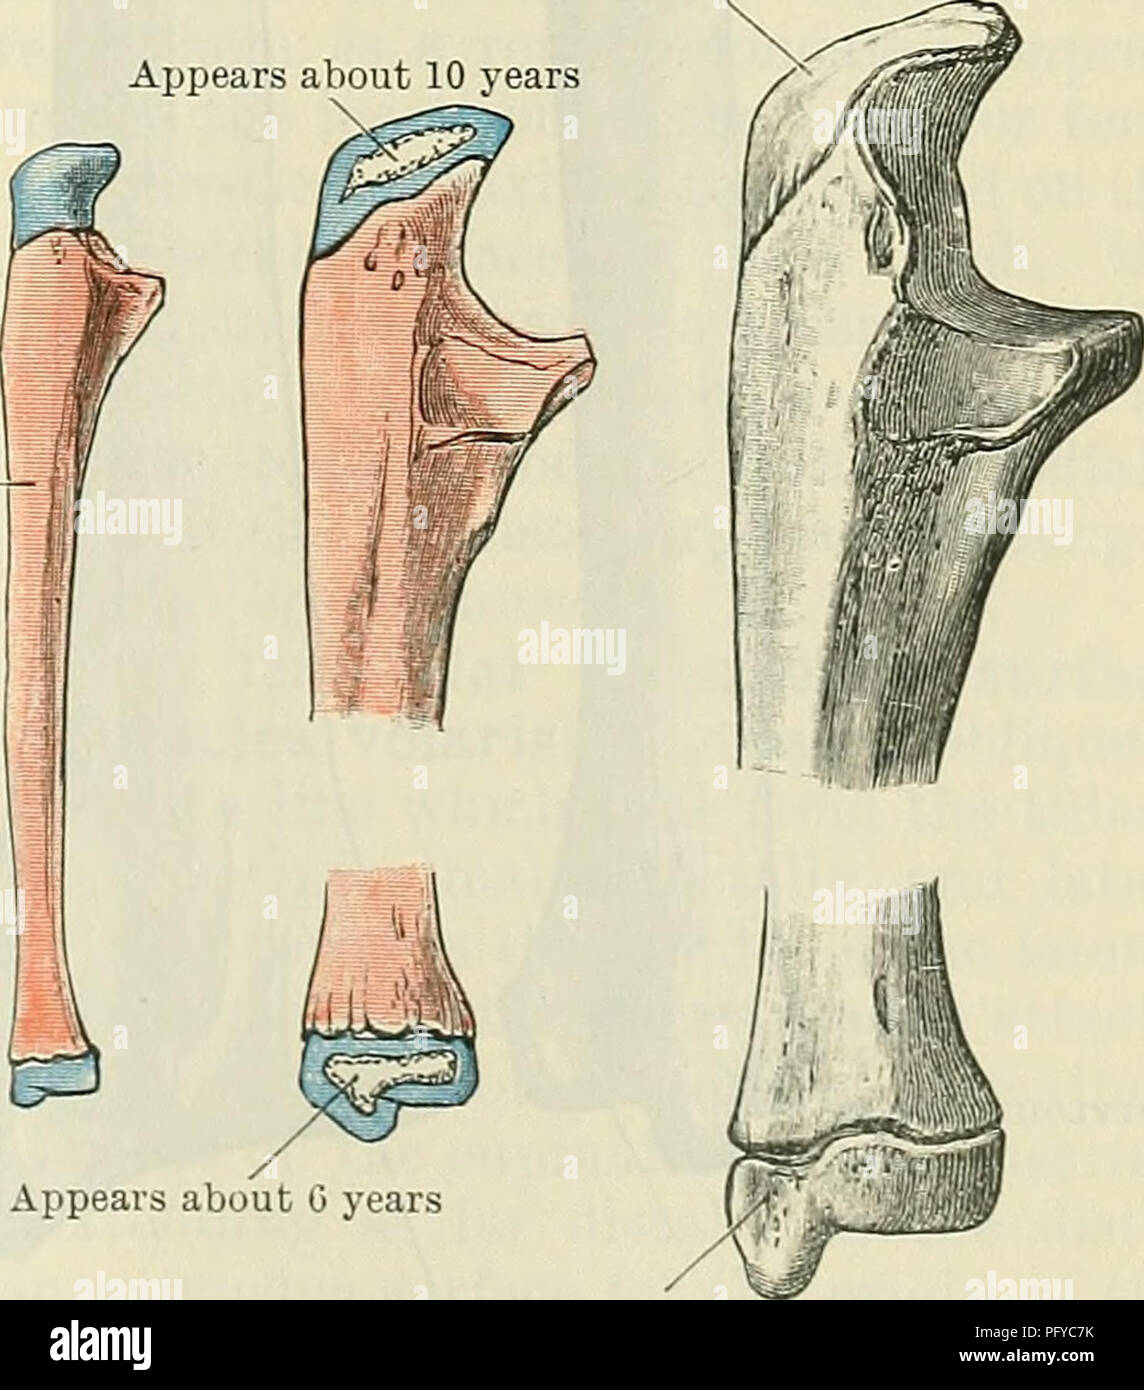 . Cunningham's Text-book of anatomy. Anatomy. THE ULNA. 213 posterior surface is subdivided by a faint longitudinal ridge, the bone between which and the interosseous crest furnishes origins for the abductor pollicis longus, extensor pollicis longus, and extensor indicis proprius muscles, in order proximo- distally. The surface of bone between the dorsal margin and the afore-mentioned longitudinal line is smooth and overlain by the extensor carpi ulnaris muscle, which does not arise from it. The distal extremity of the ulna presents a rounded head (capitulum ulnse), from which, on its medial a Stock Photo